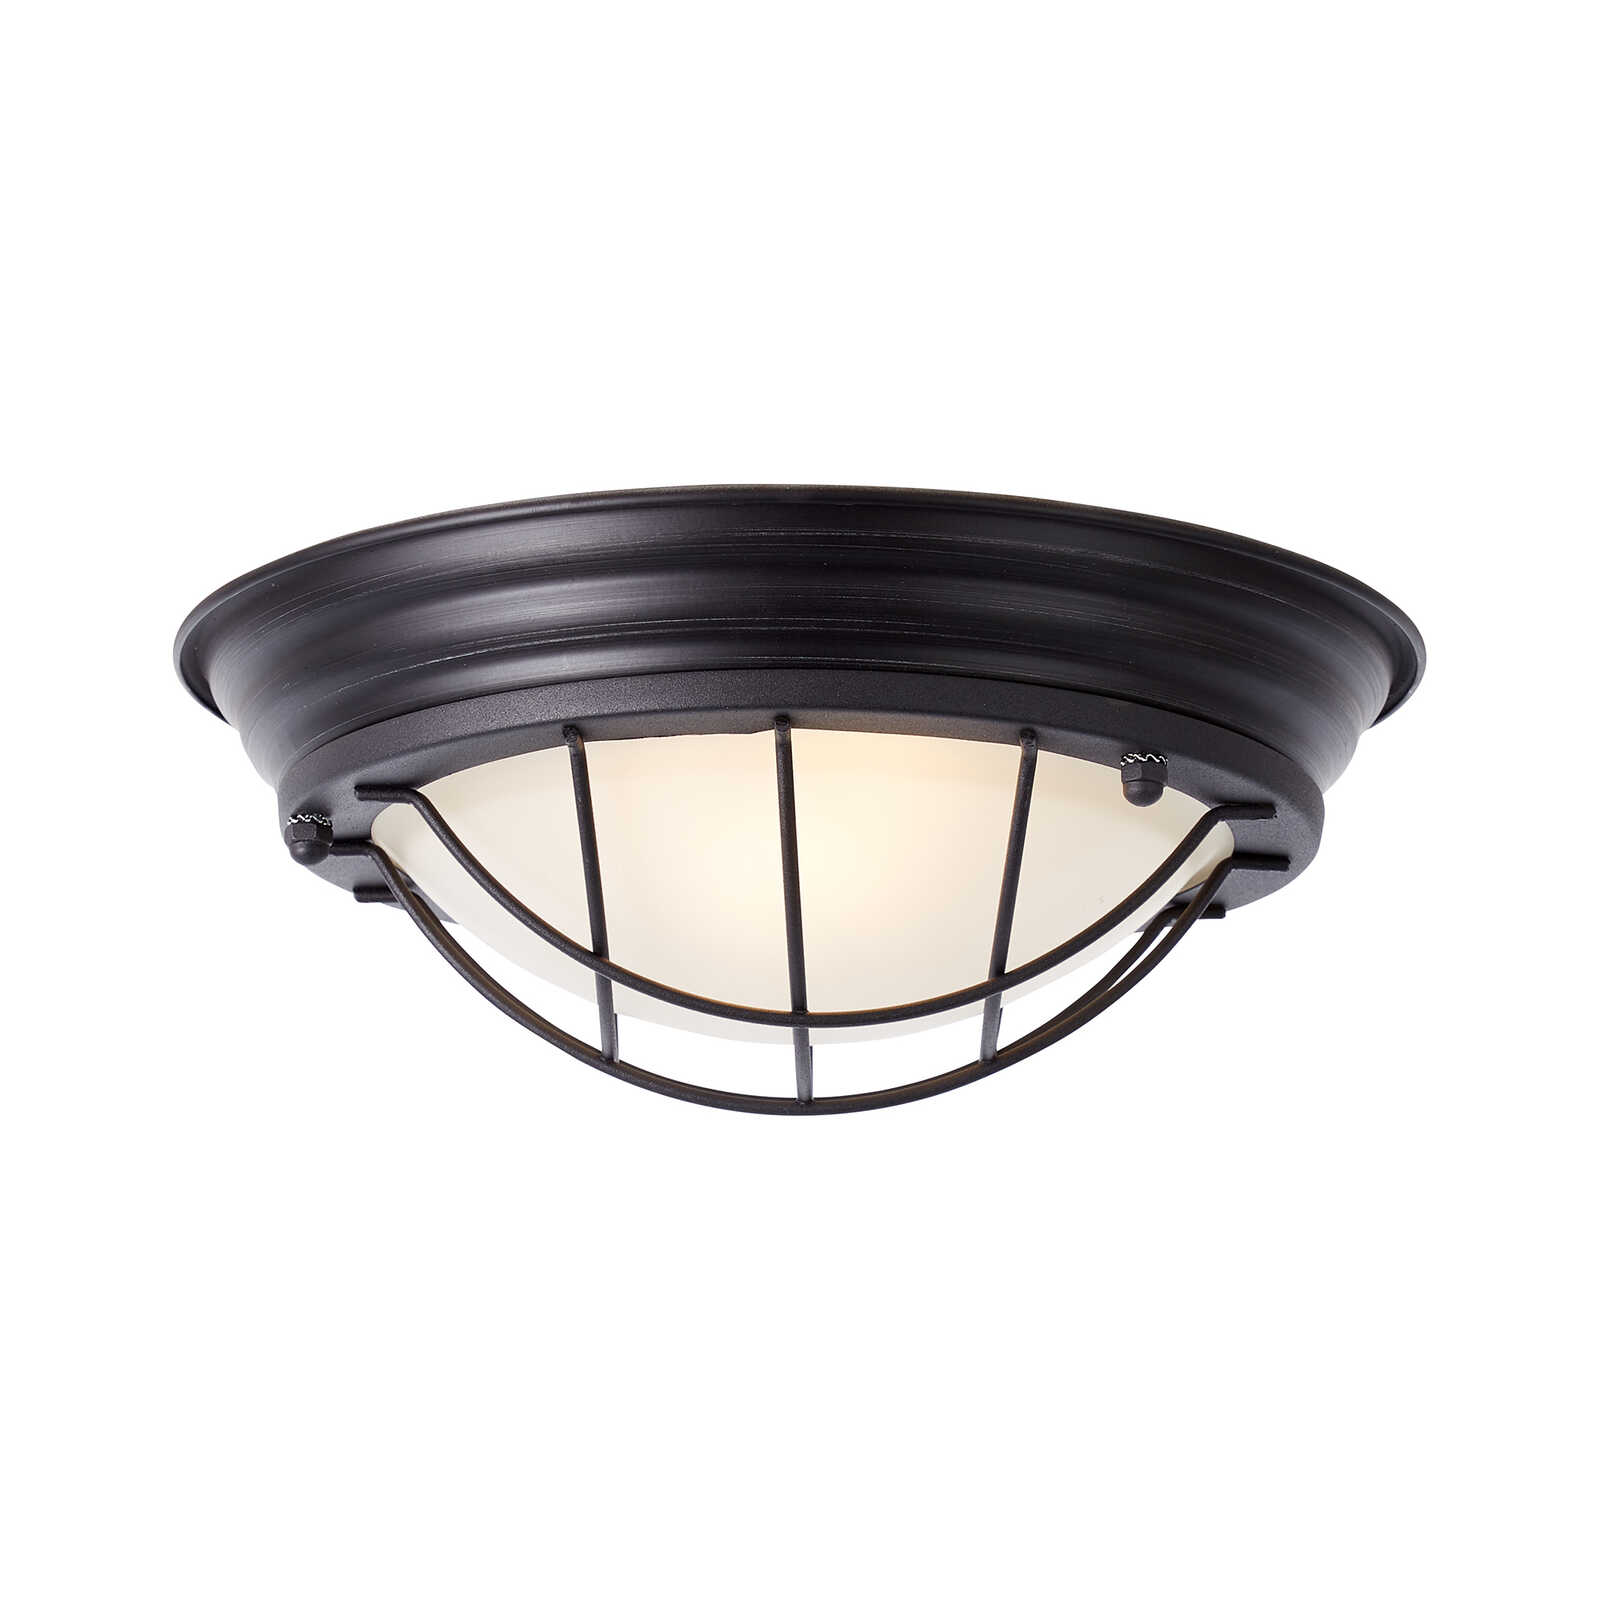 Metal wall and ceiling light - Sina 4 - Black
